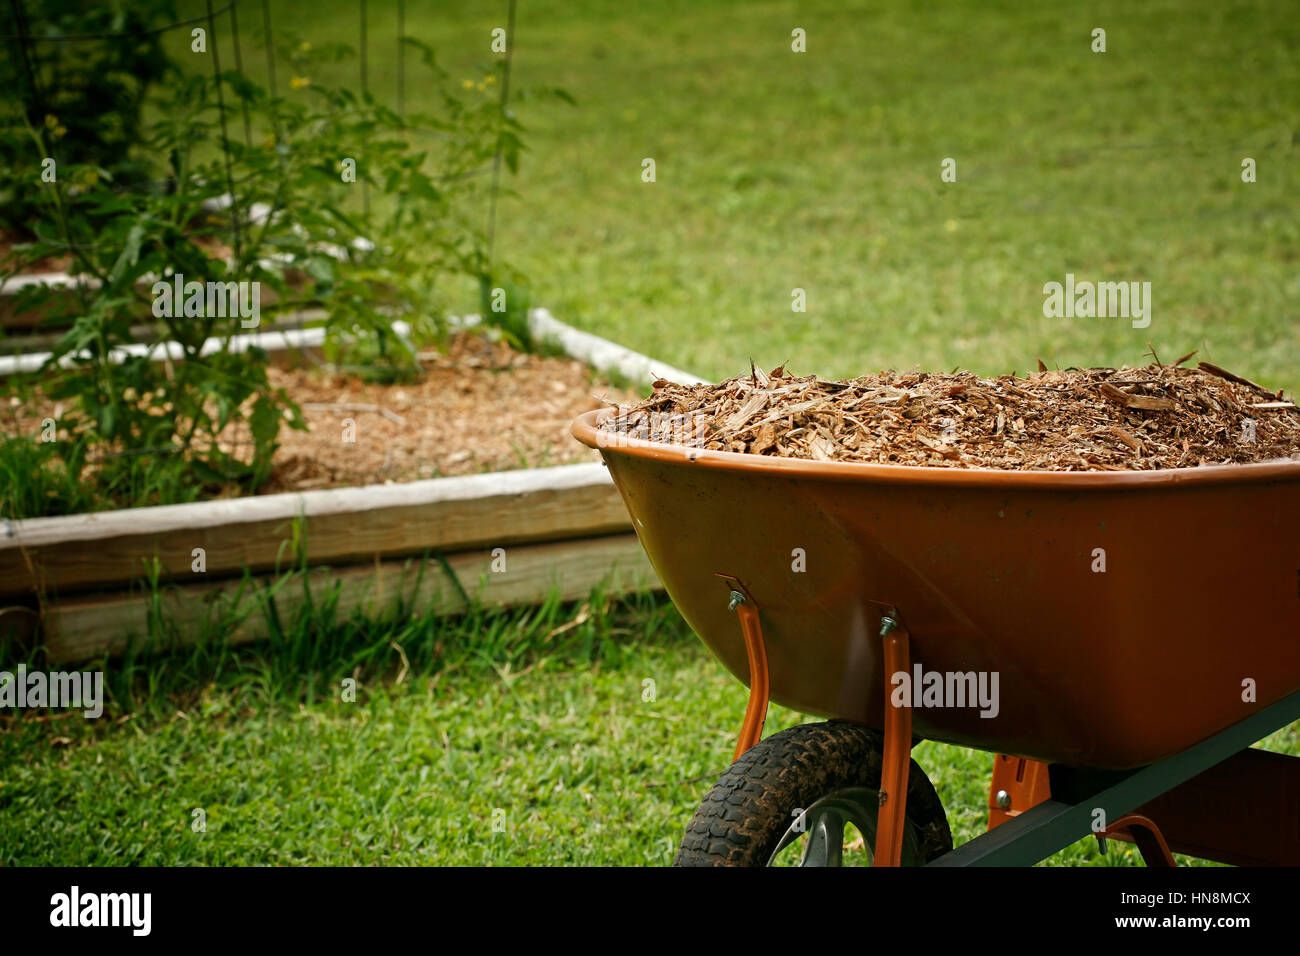 Save  Download Preview     Mulch for garden with tomato plans bed on background Stock Photo